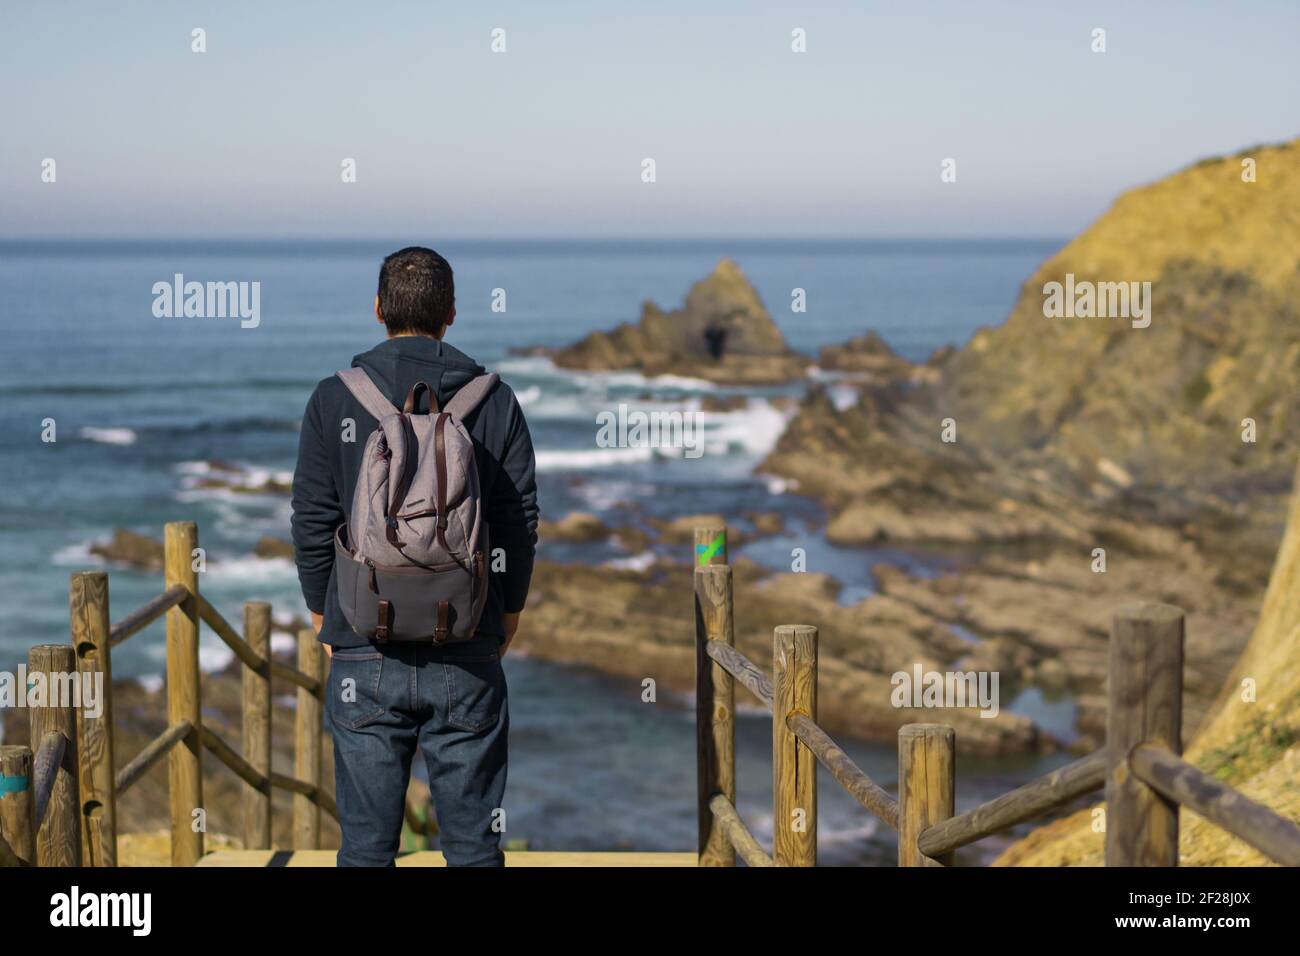 Man with a backpack seeing Praia dos Machados beach in Costa Vicentina, Portugal Stock Photo